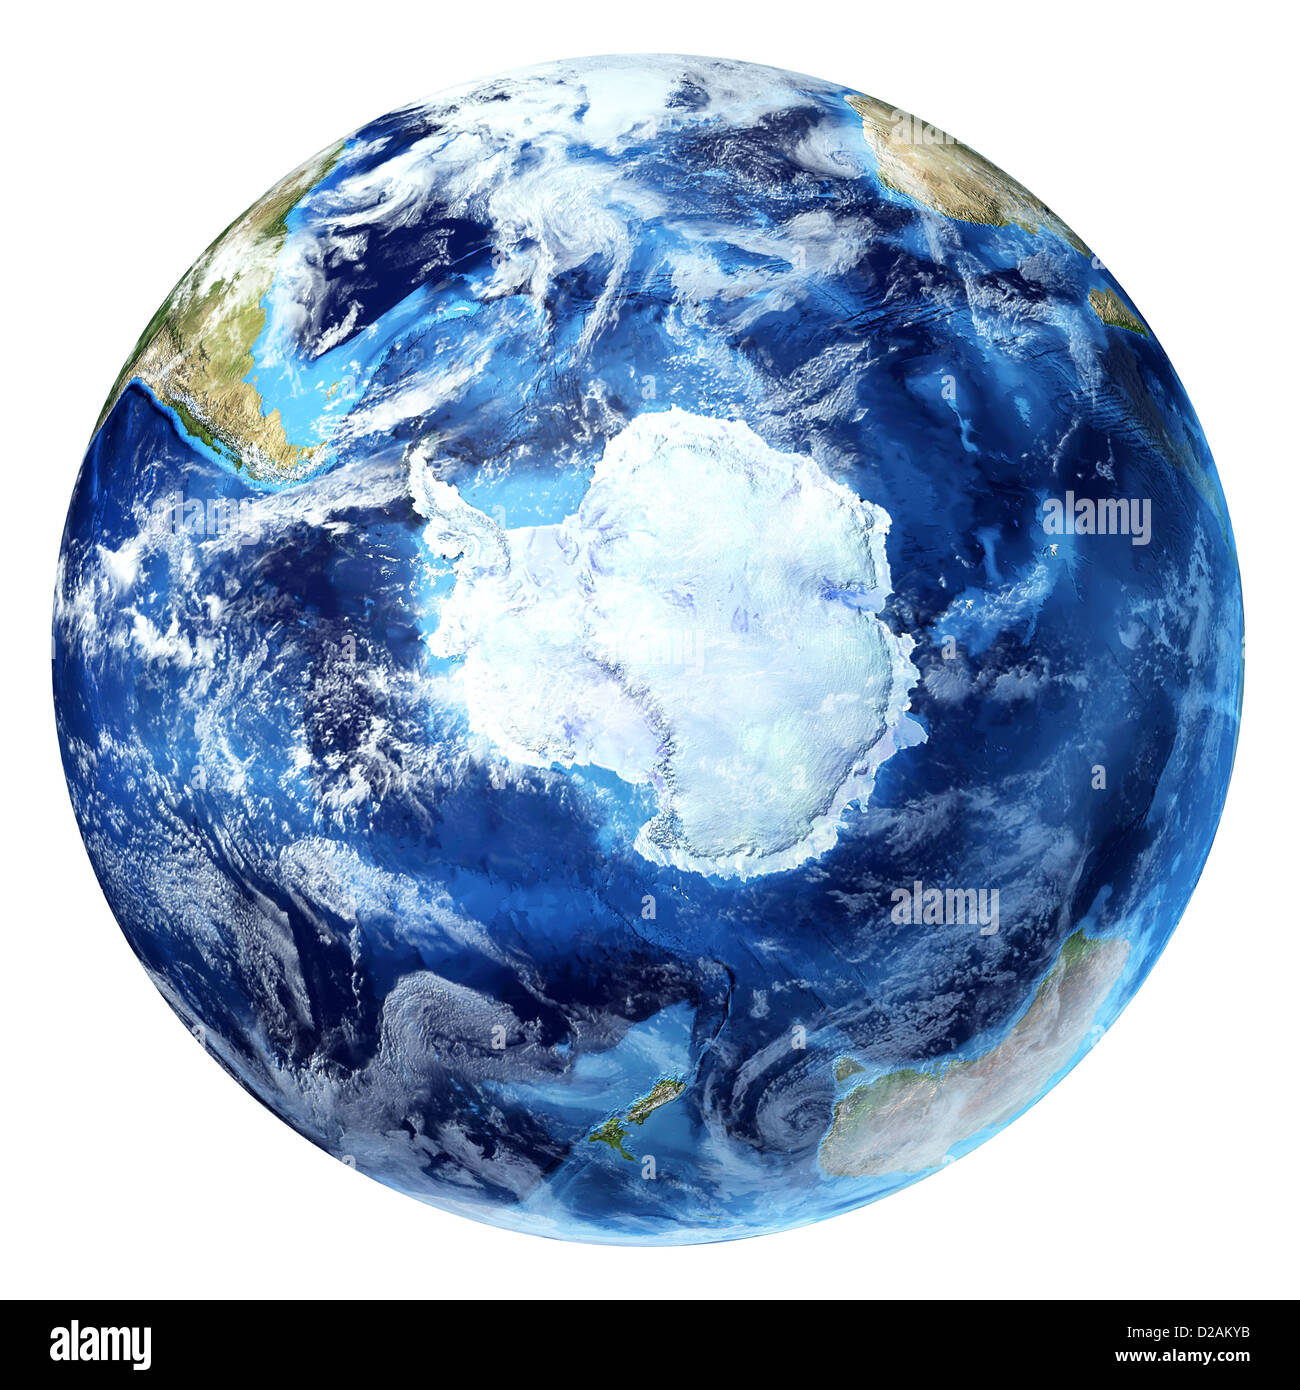 Earth globe, realistic 3 D rendering, with some clouds. Antarctic (south pole) view. On white background. Stock Photo